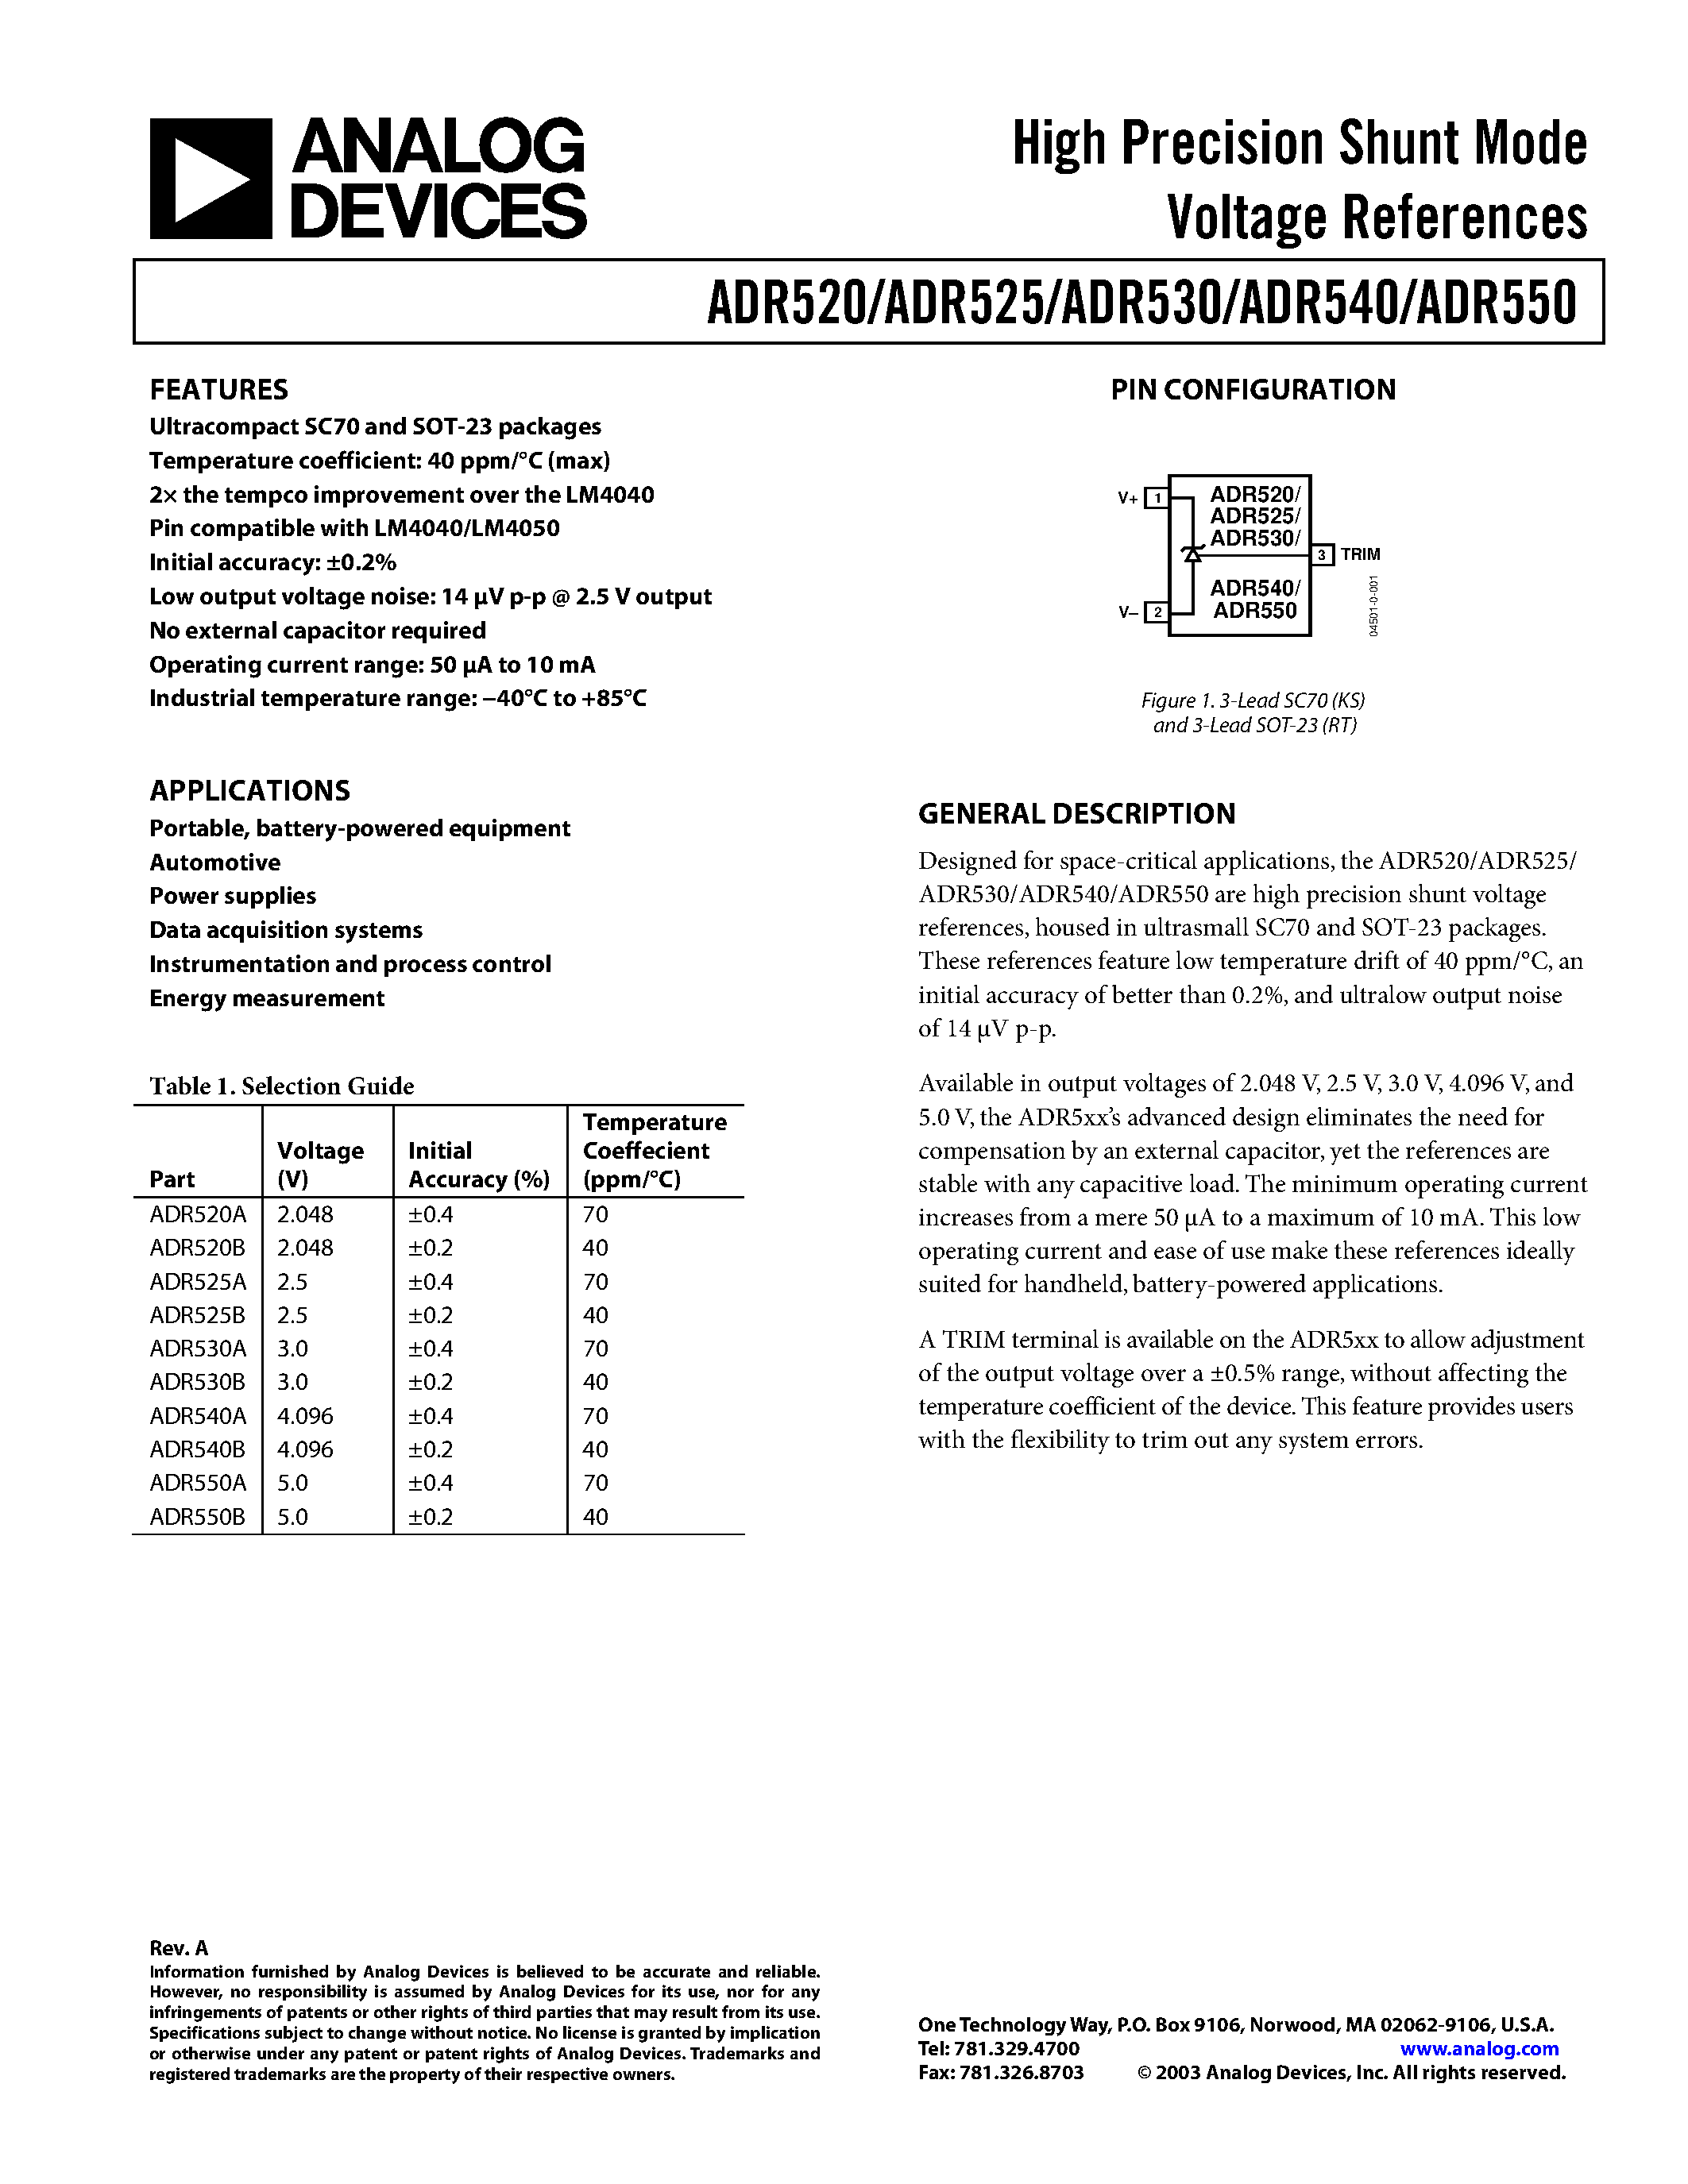 Datasheet ADR550BRT-R2 - High Precision Shunt Mode Voltage References page 1